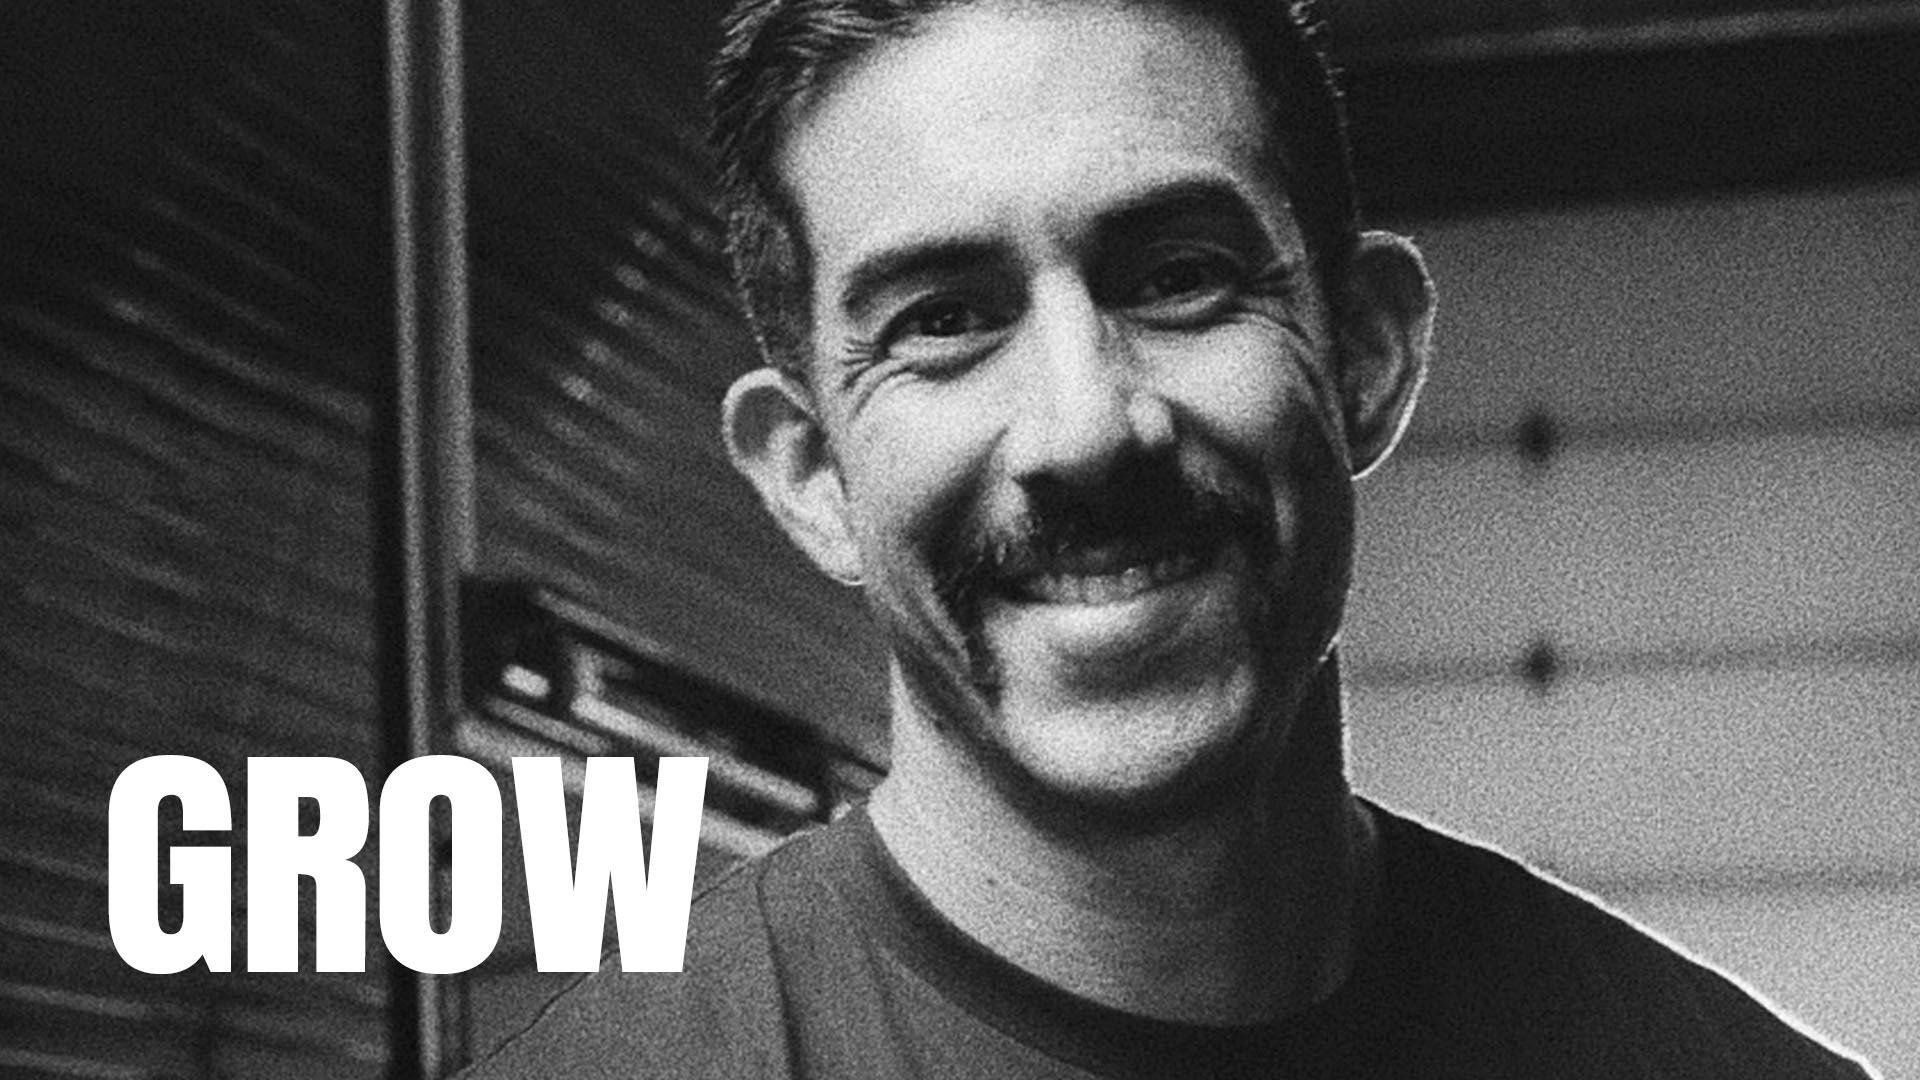 A black and white photo of a man smiling to camera. The word "GROW" is superimposed.